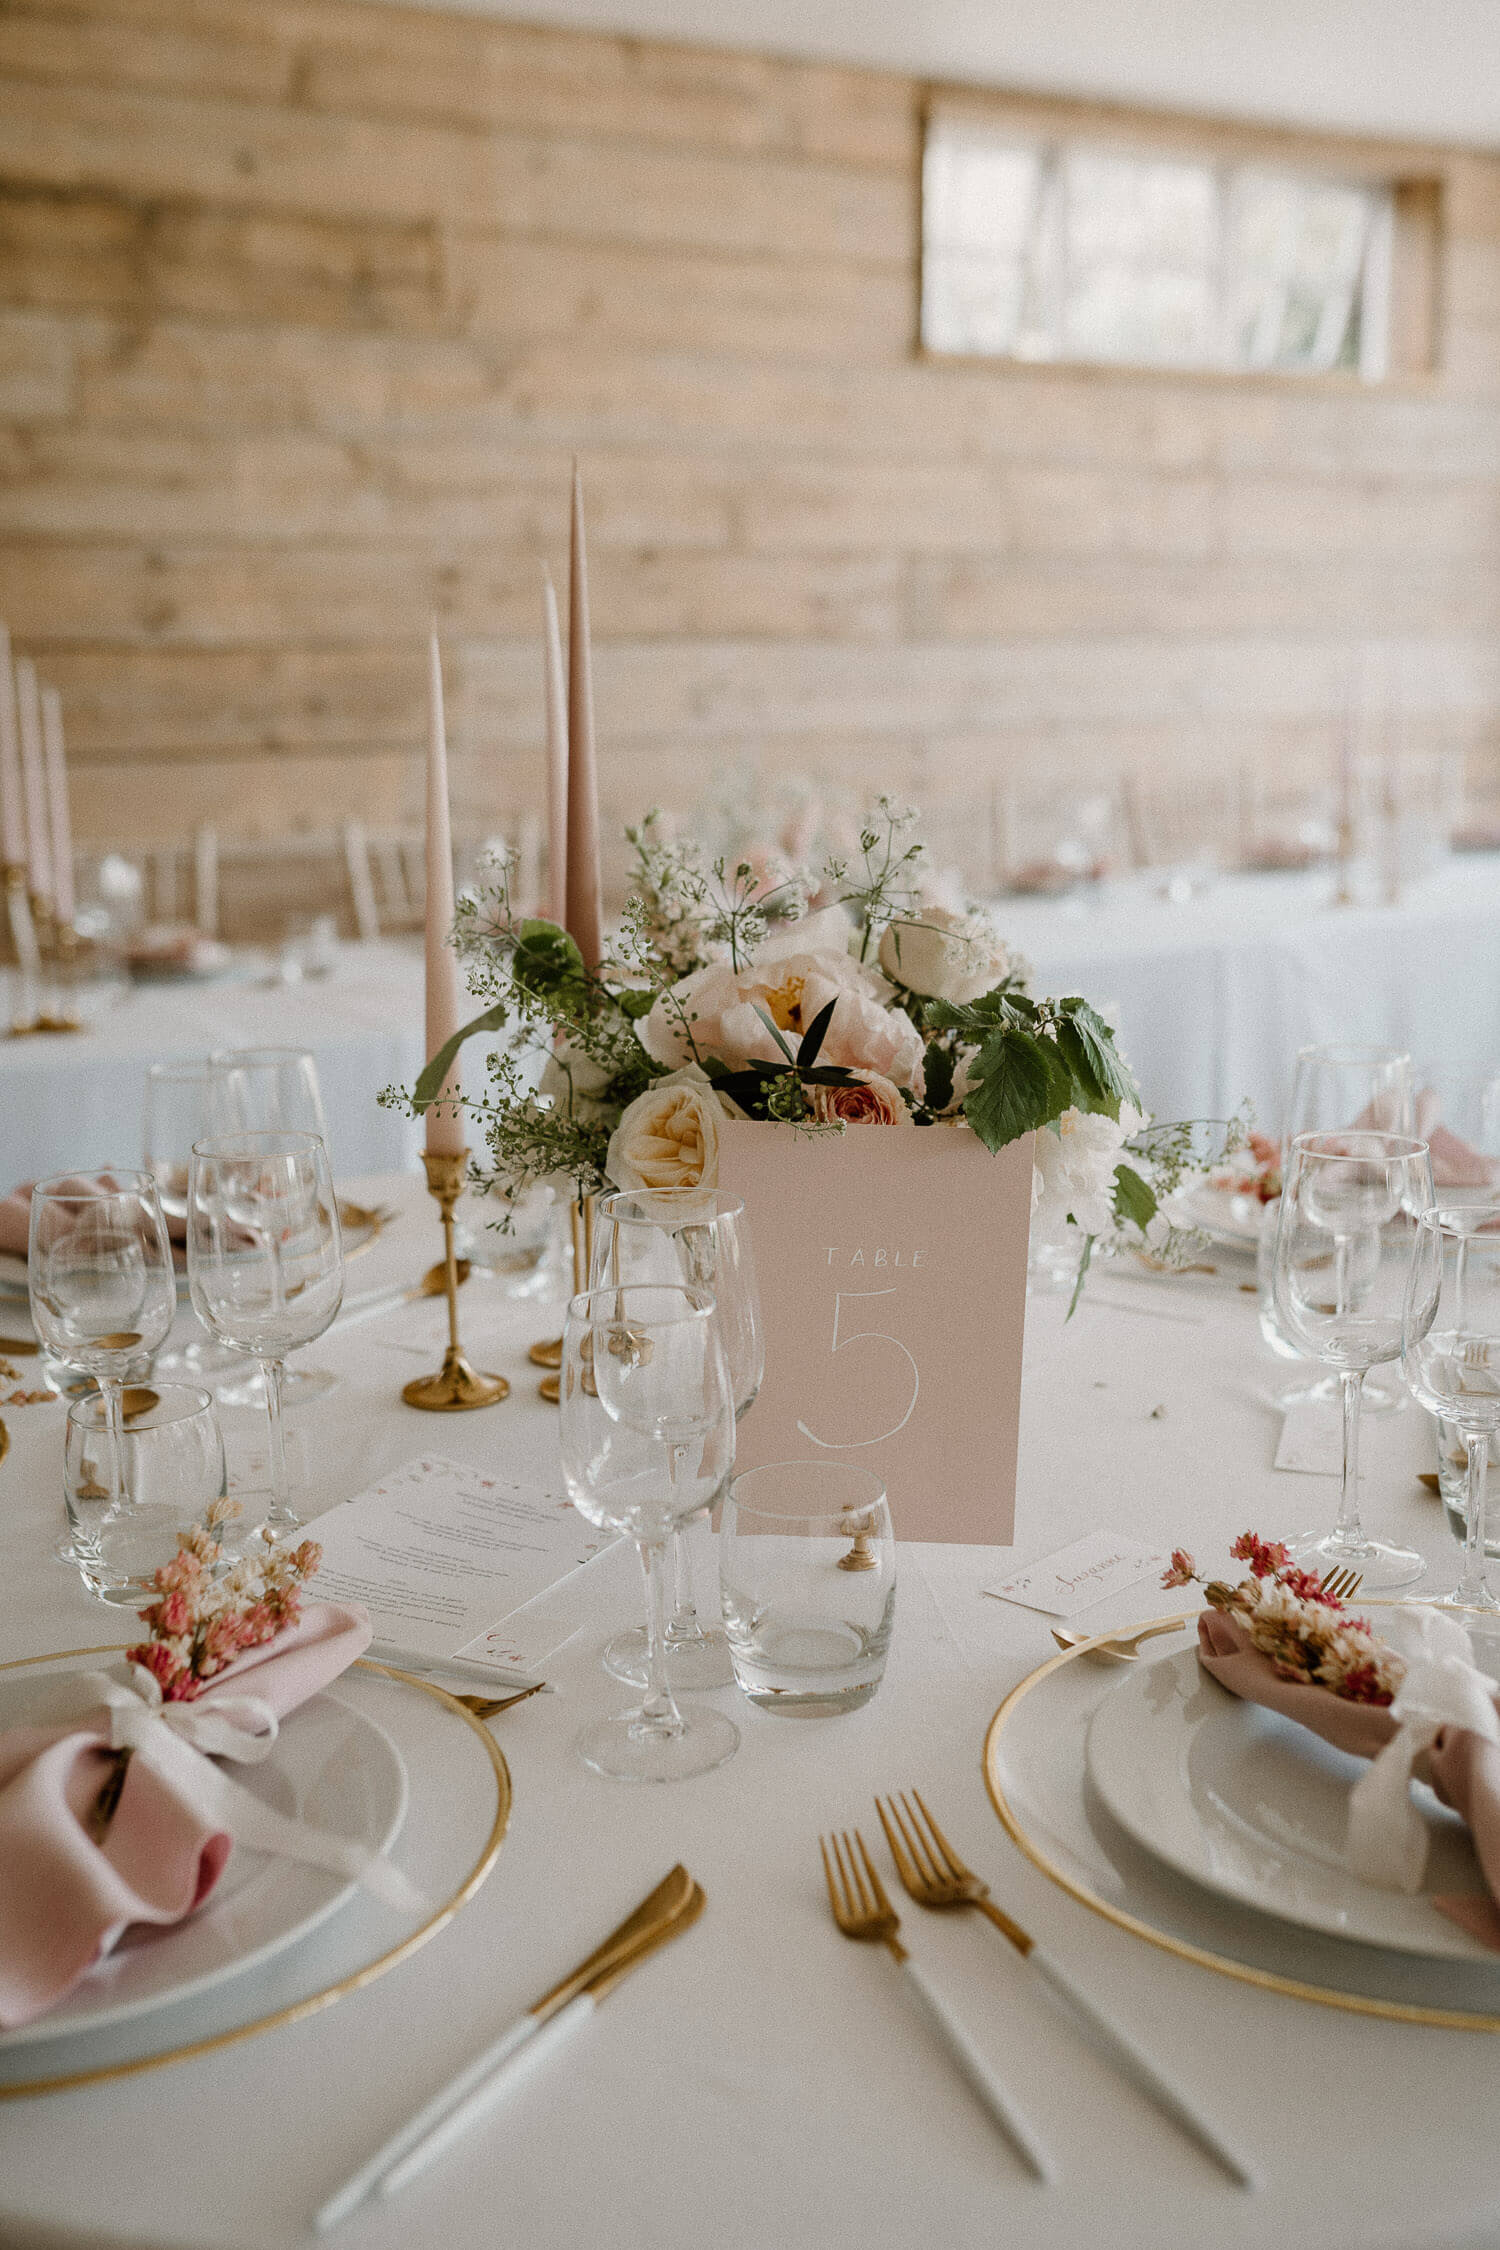 Beautifully styled converted barn reception space featuring a luxe colour scheme of pink and gold, stunning floral arrangements and glinting candlesticks.